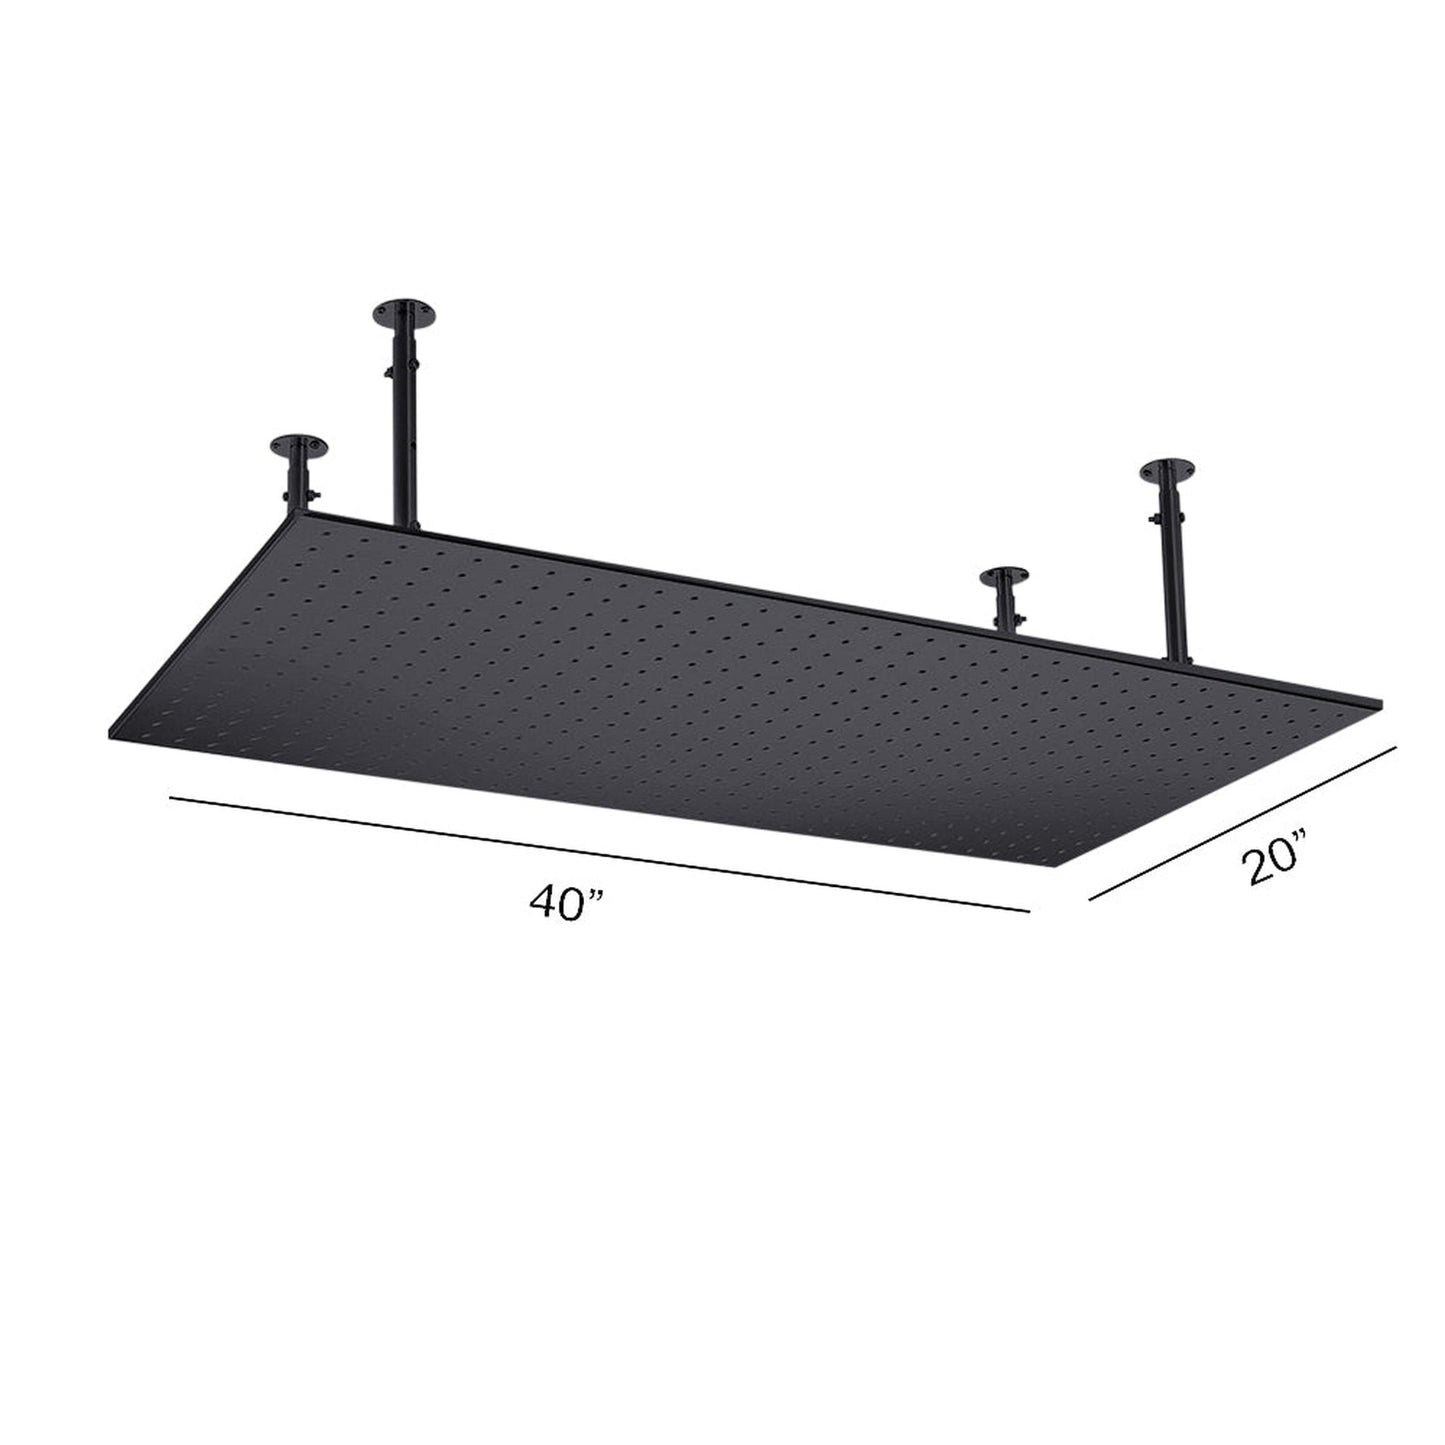 Fontana Martinique Creative Luxury Large Matte Black Rectangular Ceiling Mounted LED Solid Brass Shower Head Rain Shower System With Hand Shower